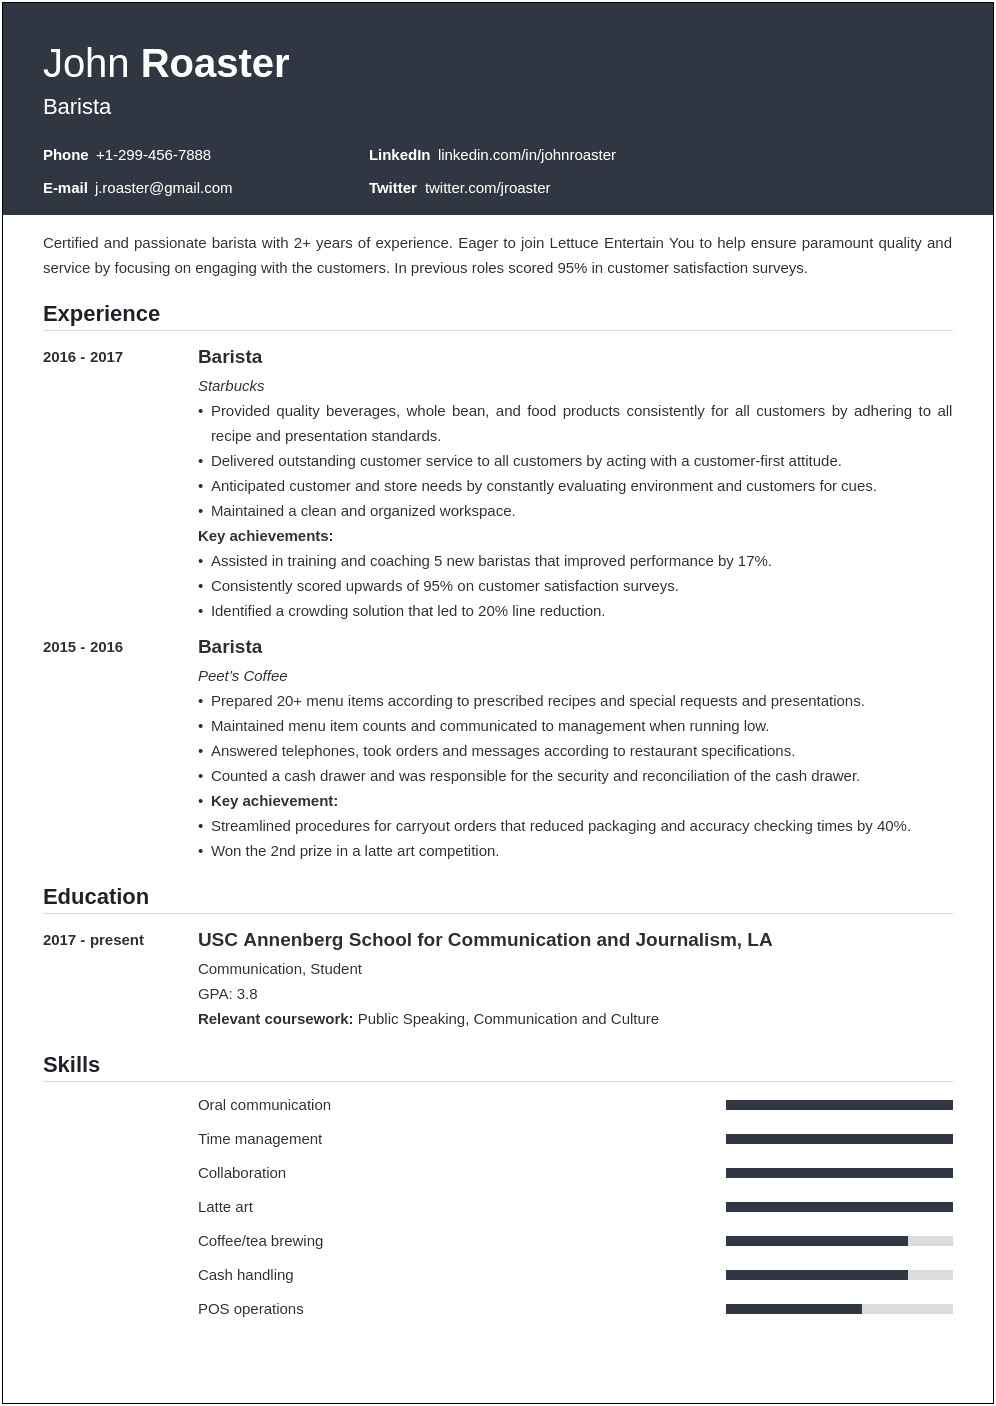 Resume Objective Examples For Coffee Shop